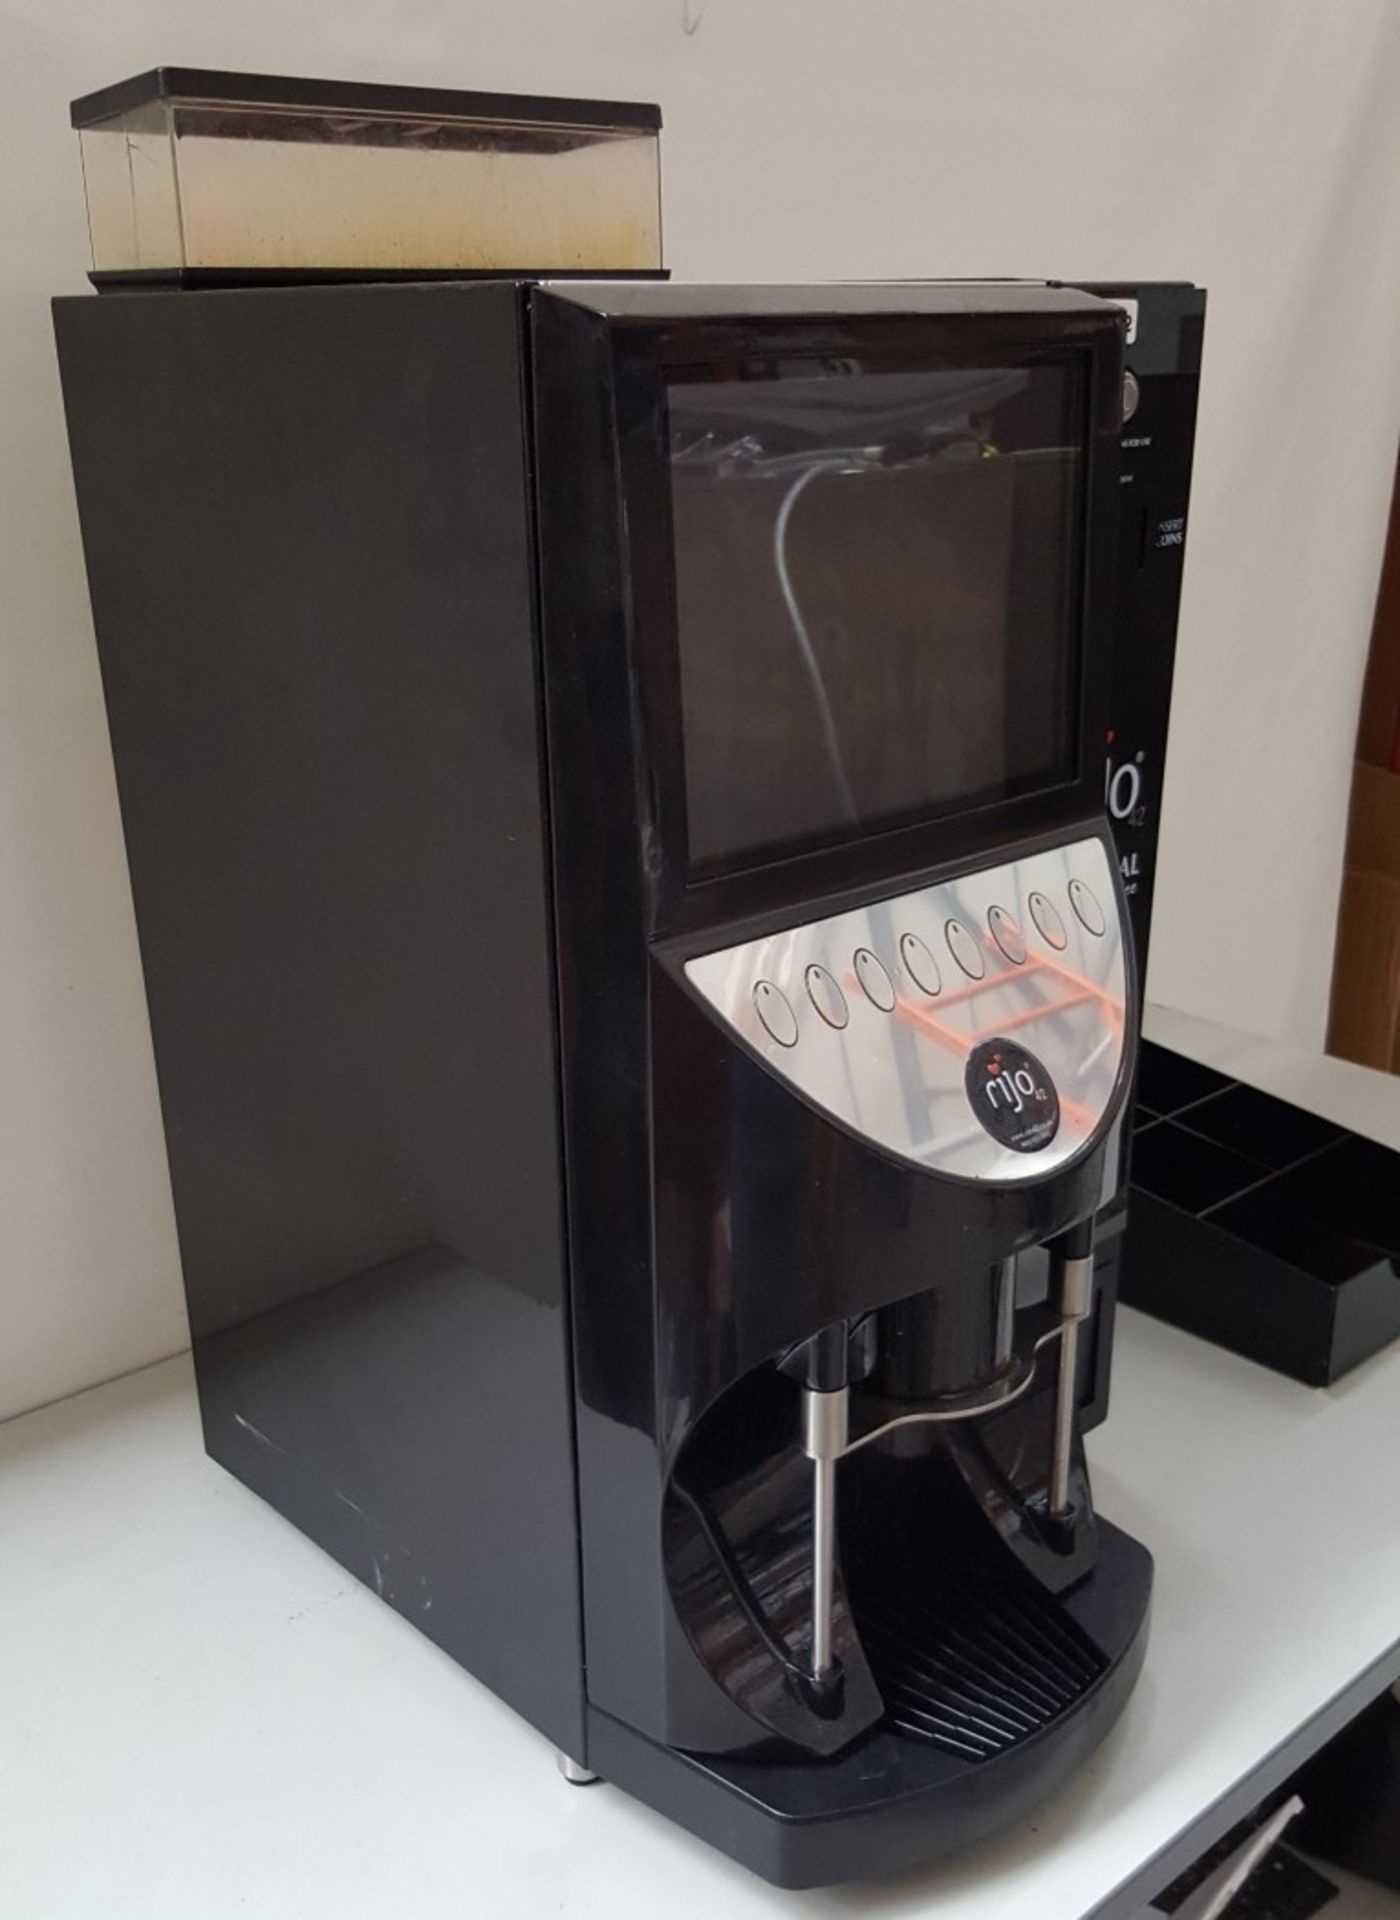 1 x Rijo 42 Brasil RSD Touch Bean to Cup Coffee Machine - Ref BLT112 - Image 7 of 9